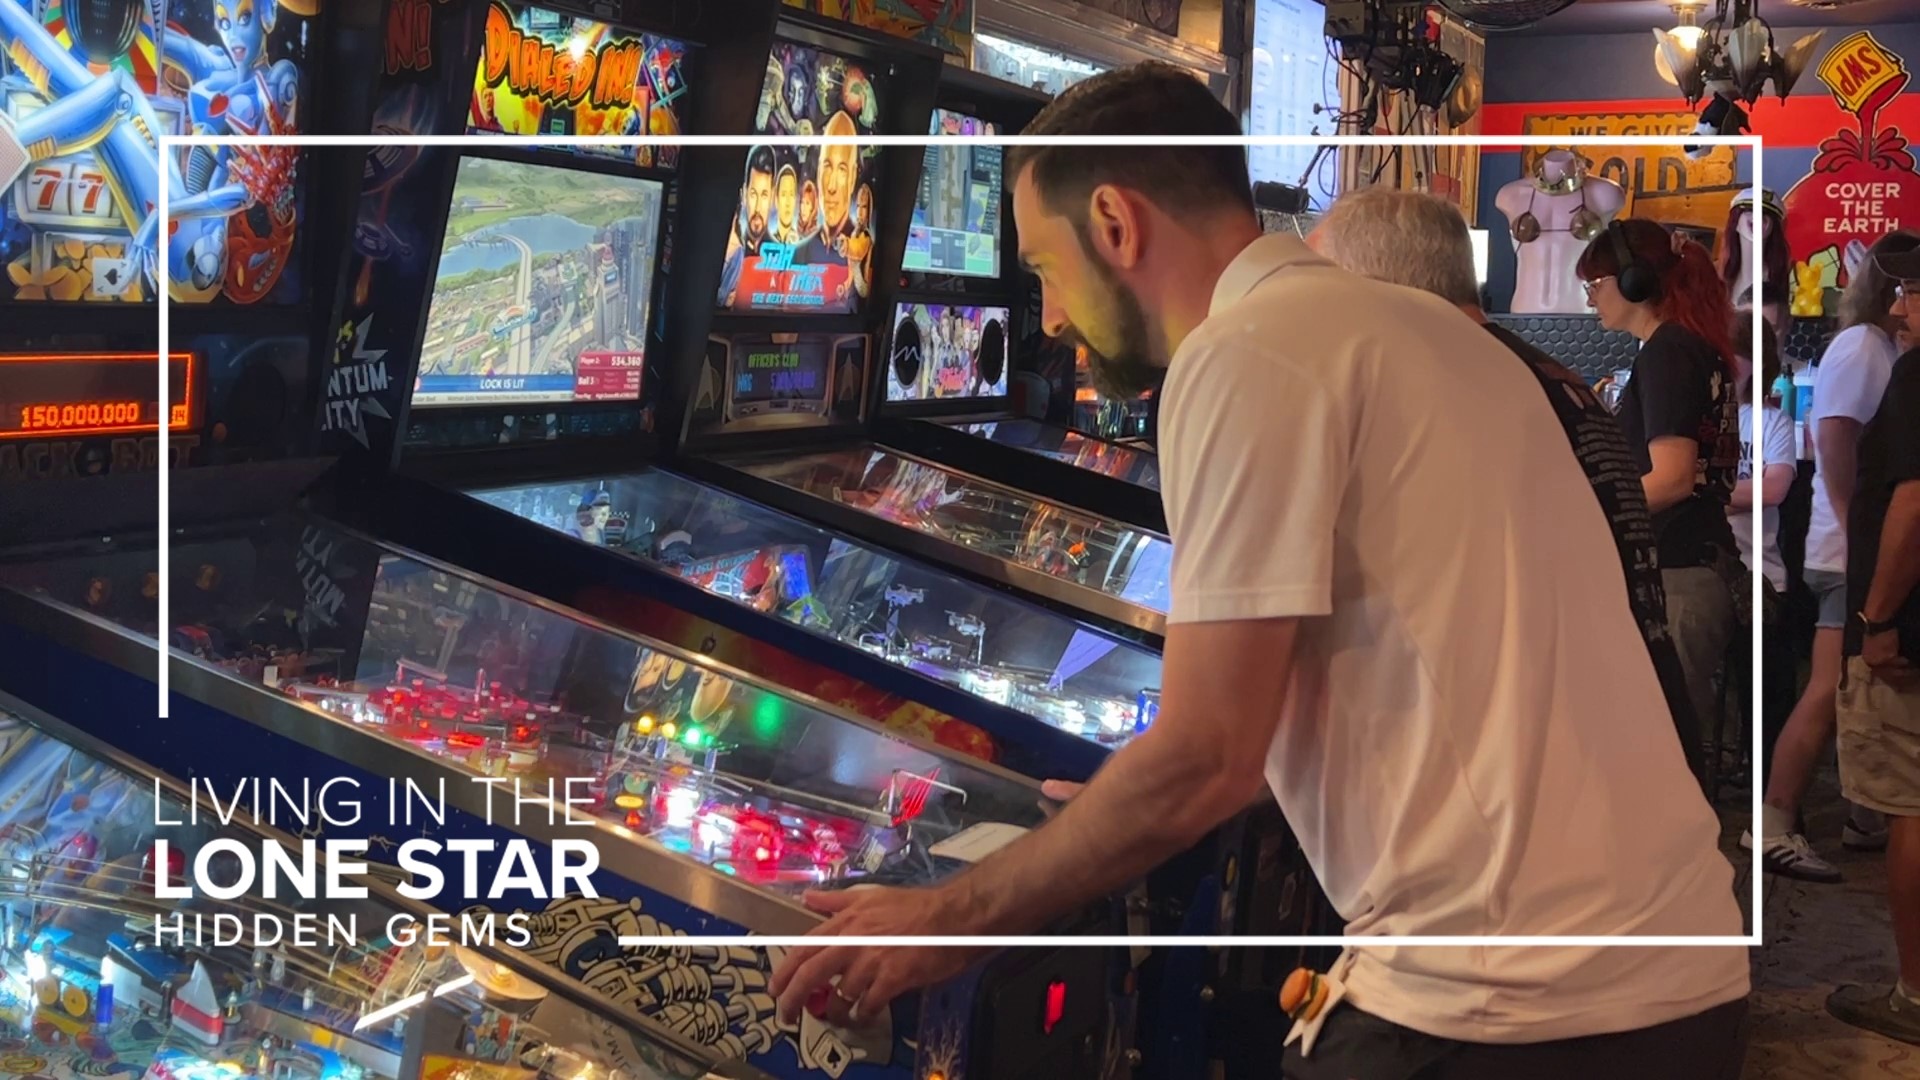 About 500 people play in the league's pinball tournaments and events each year, according to co-founder Phil Grimaldi.